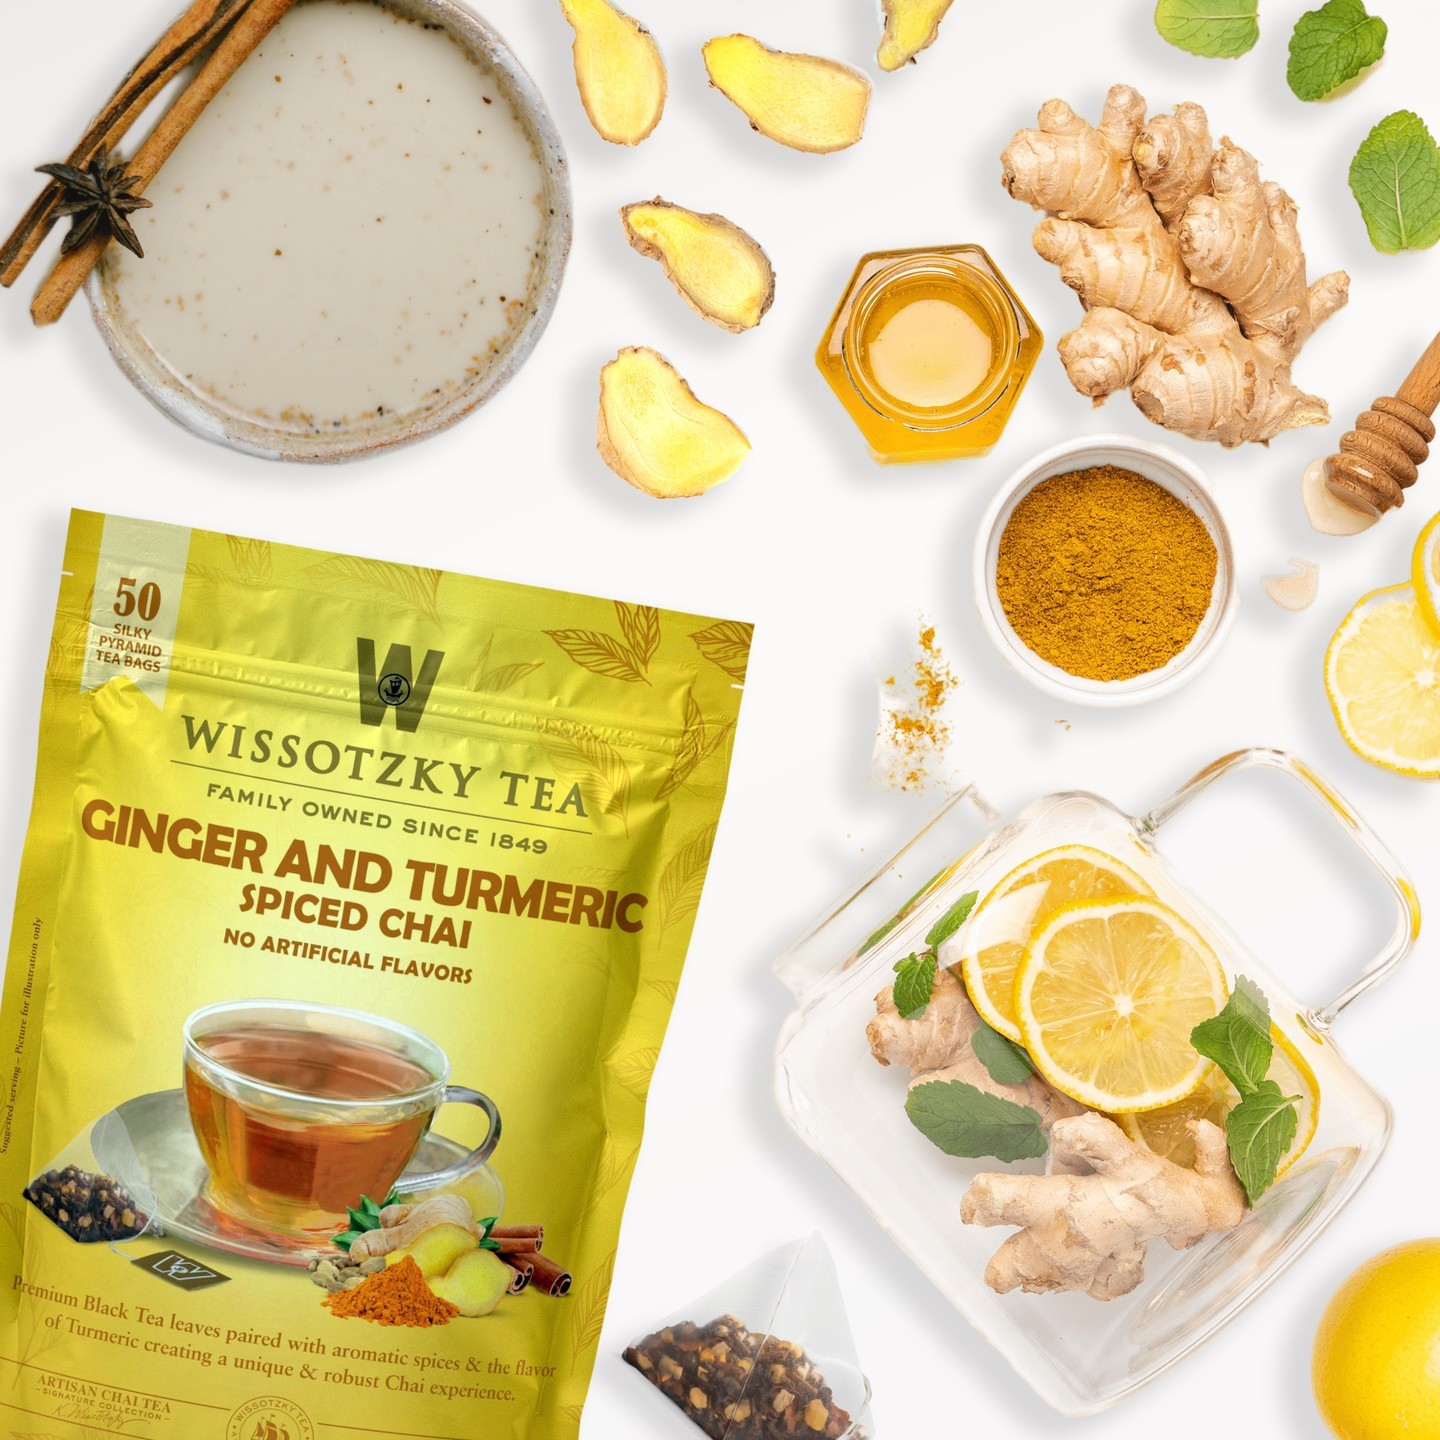 Ginger and Turmeric Spiced Chai Wissotzky Tea - Costco